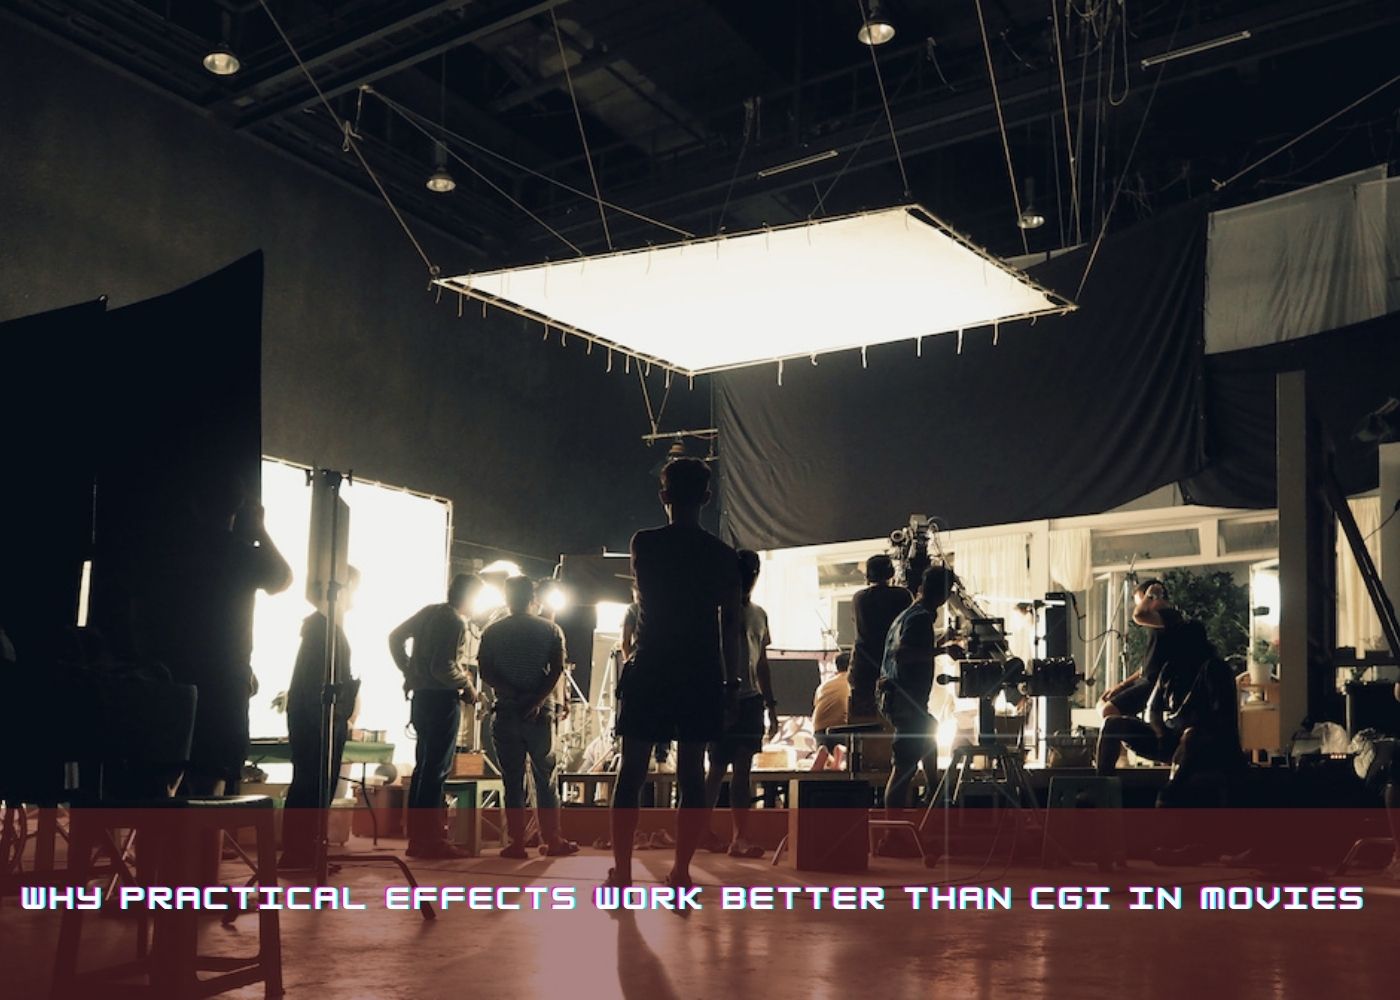 Why Practical Effects Work Better than CGI in Movies 